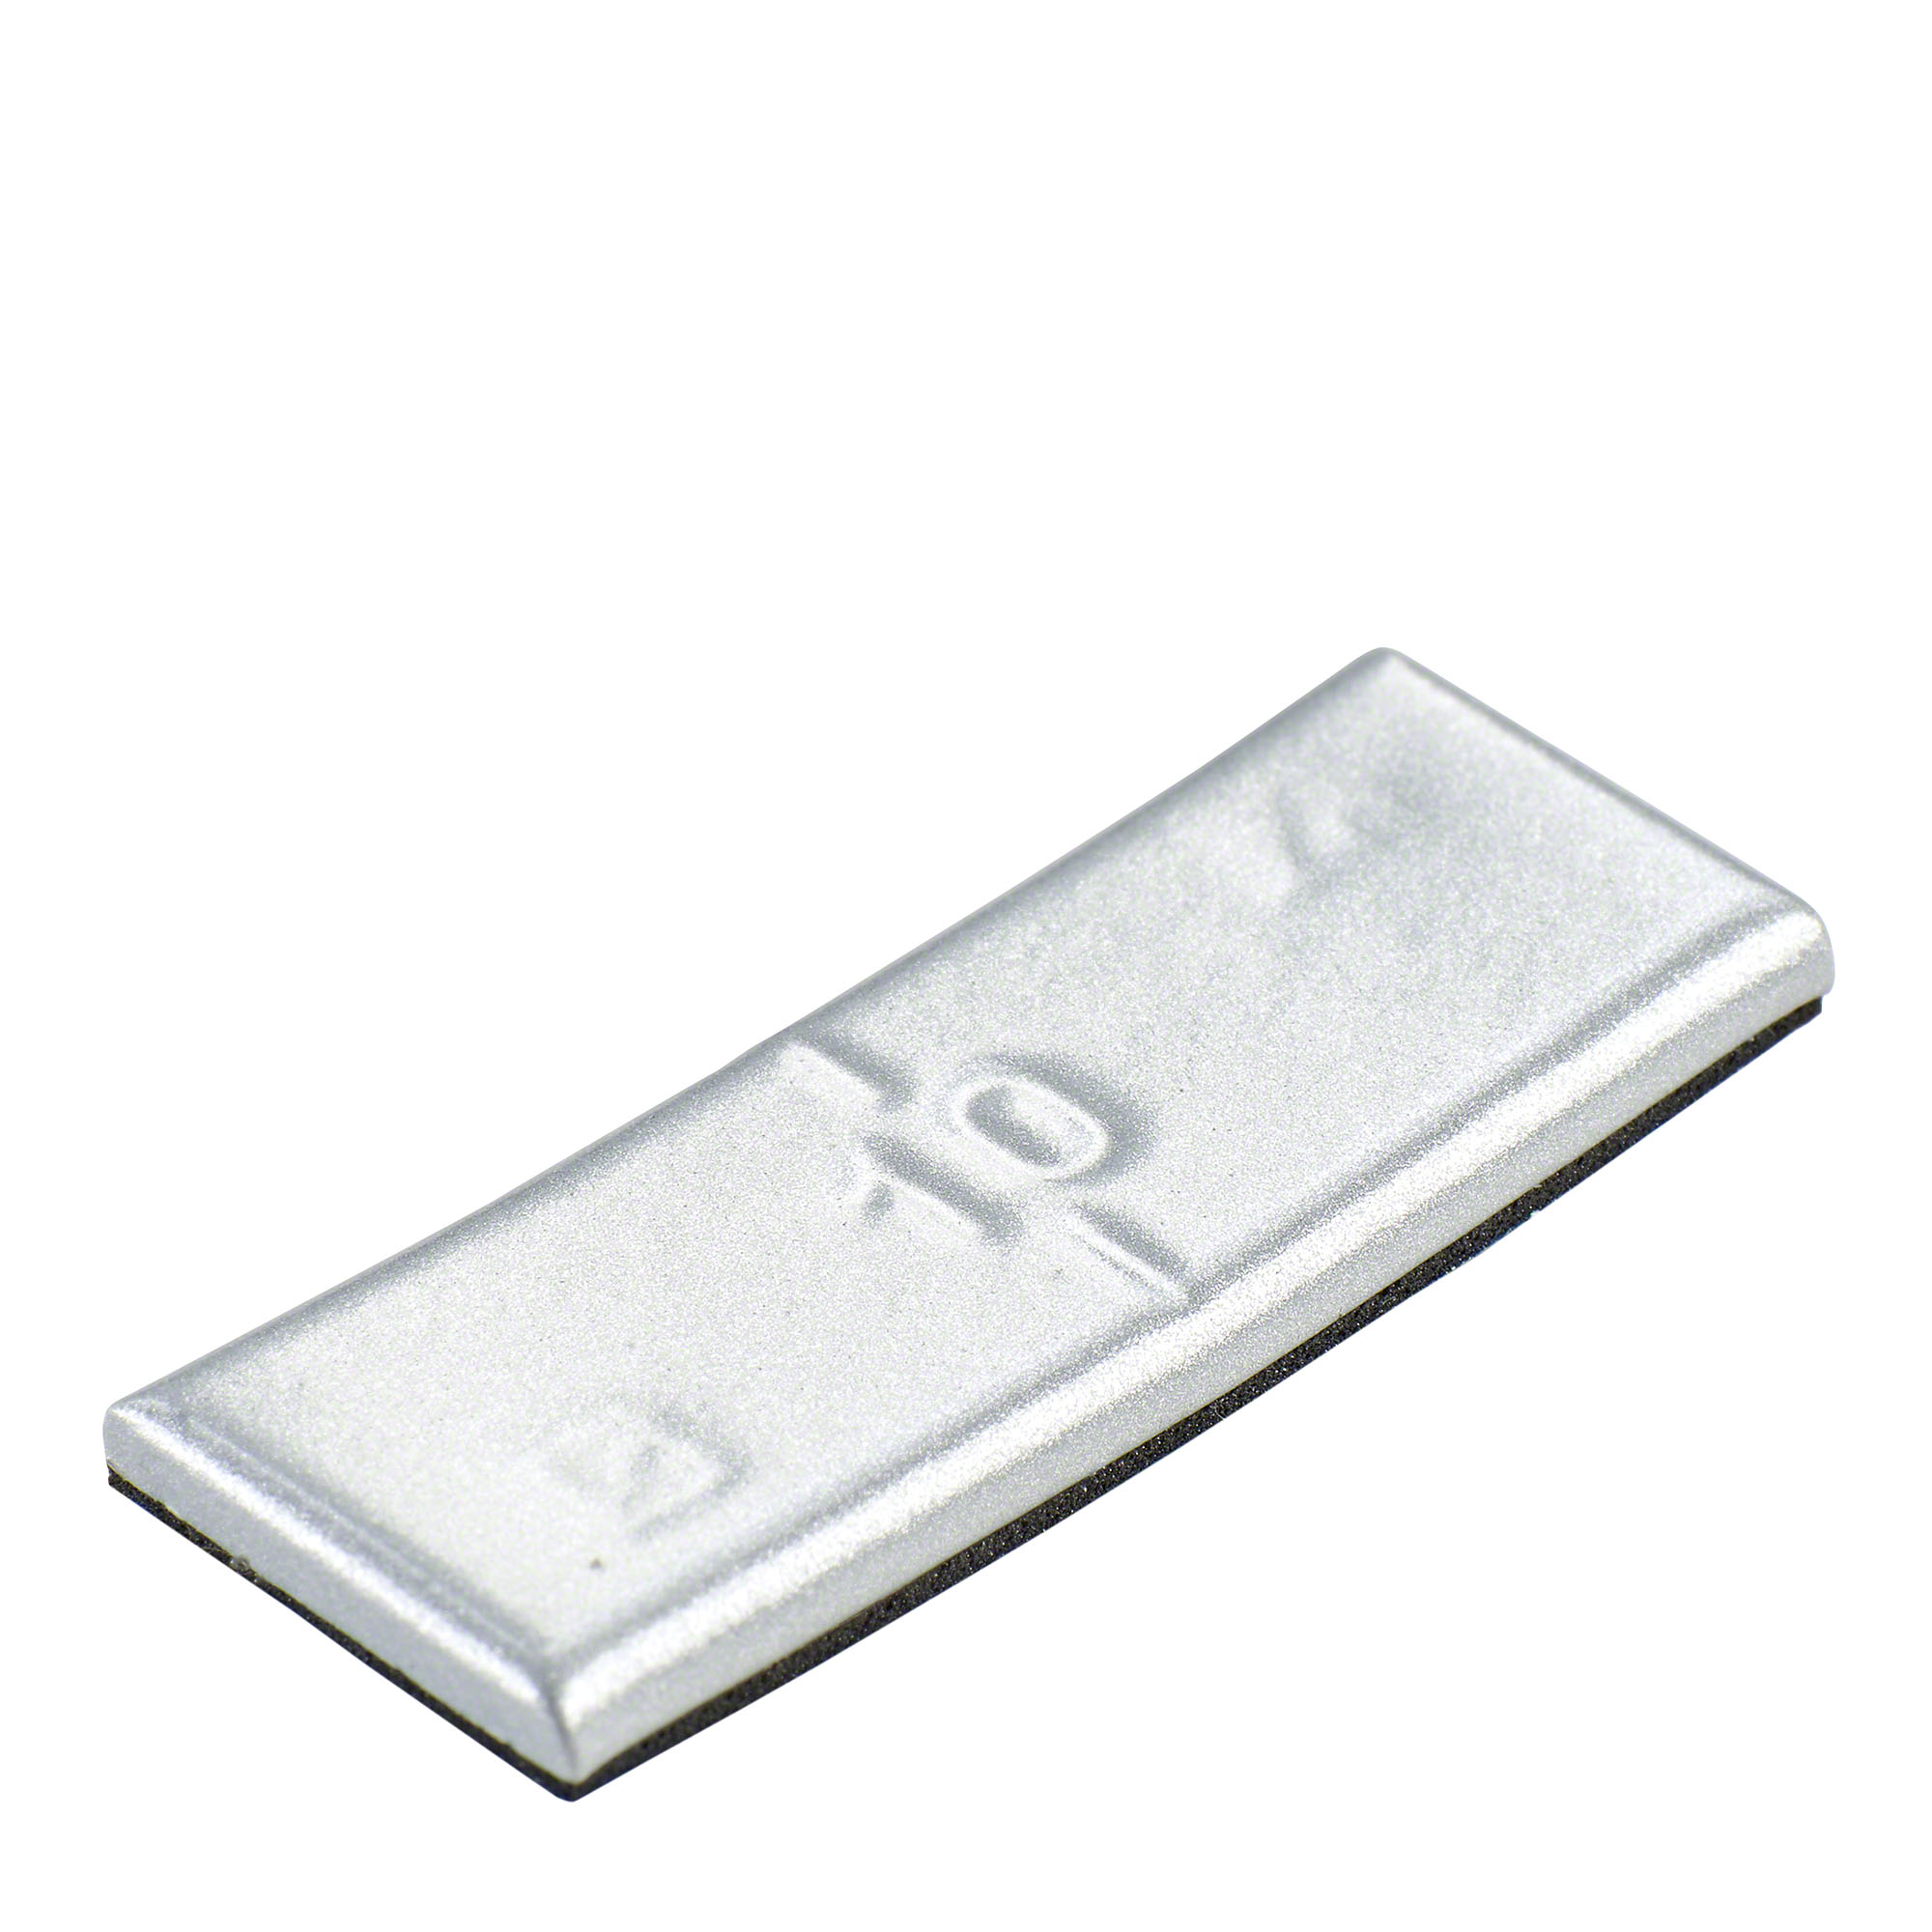 adhesive weight - Typ 360, 10 g, zinc, silver